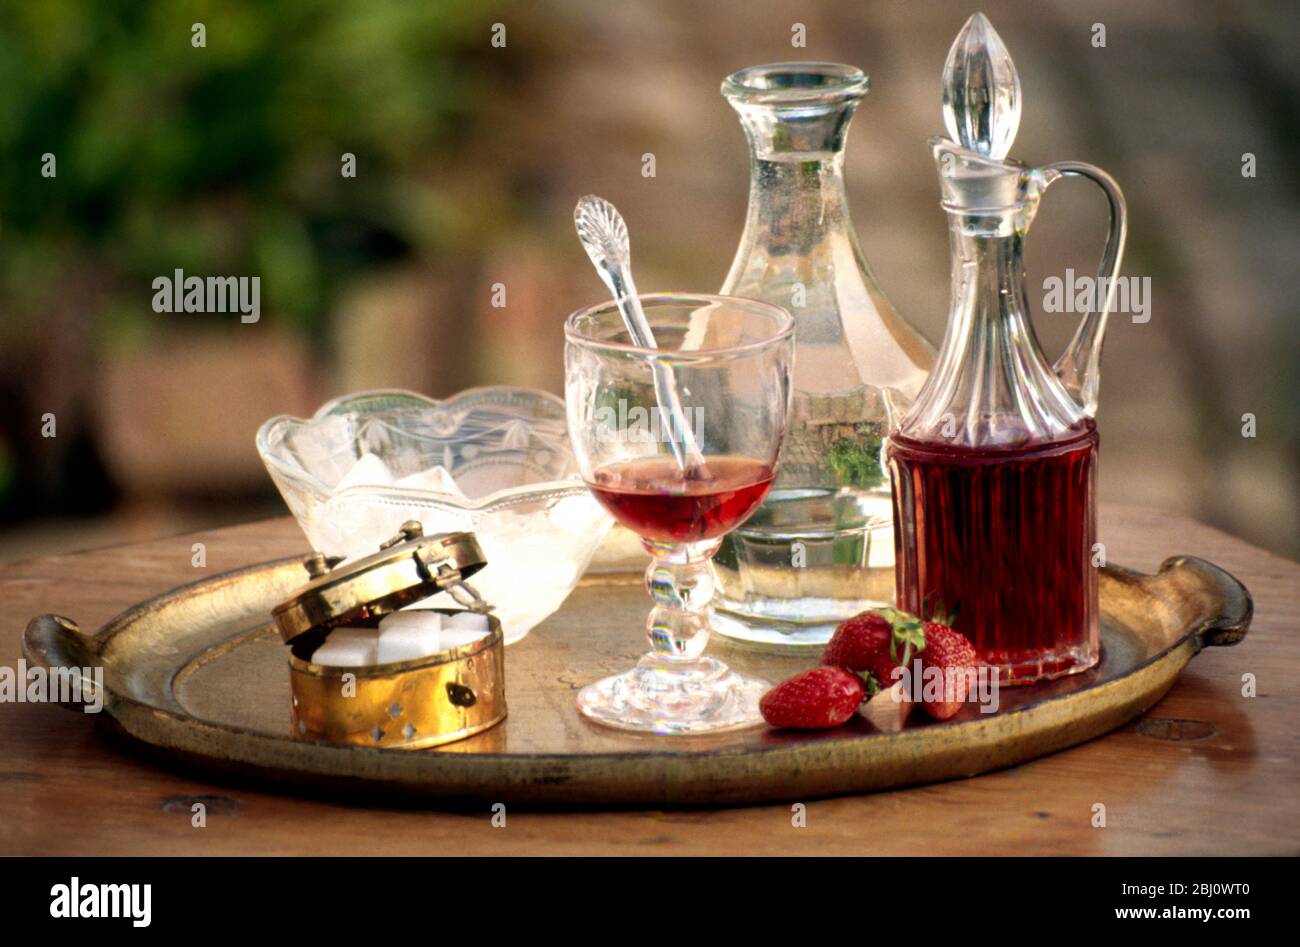 Making up a strawberry cordial using old glassware on florentine gilt tray - Stock Photo